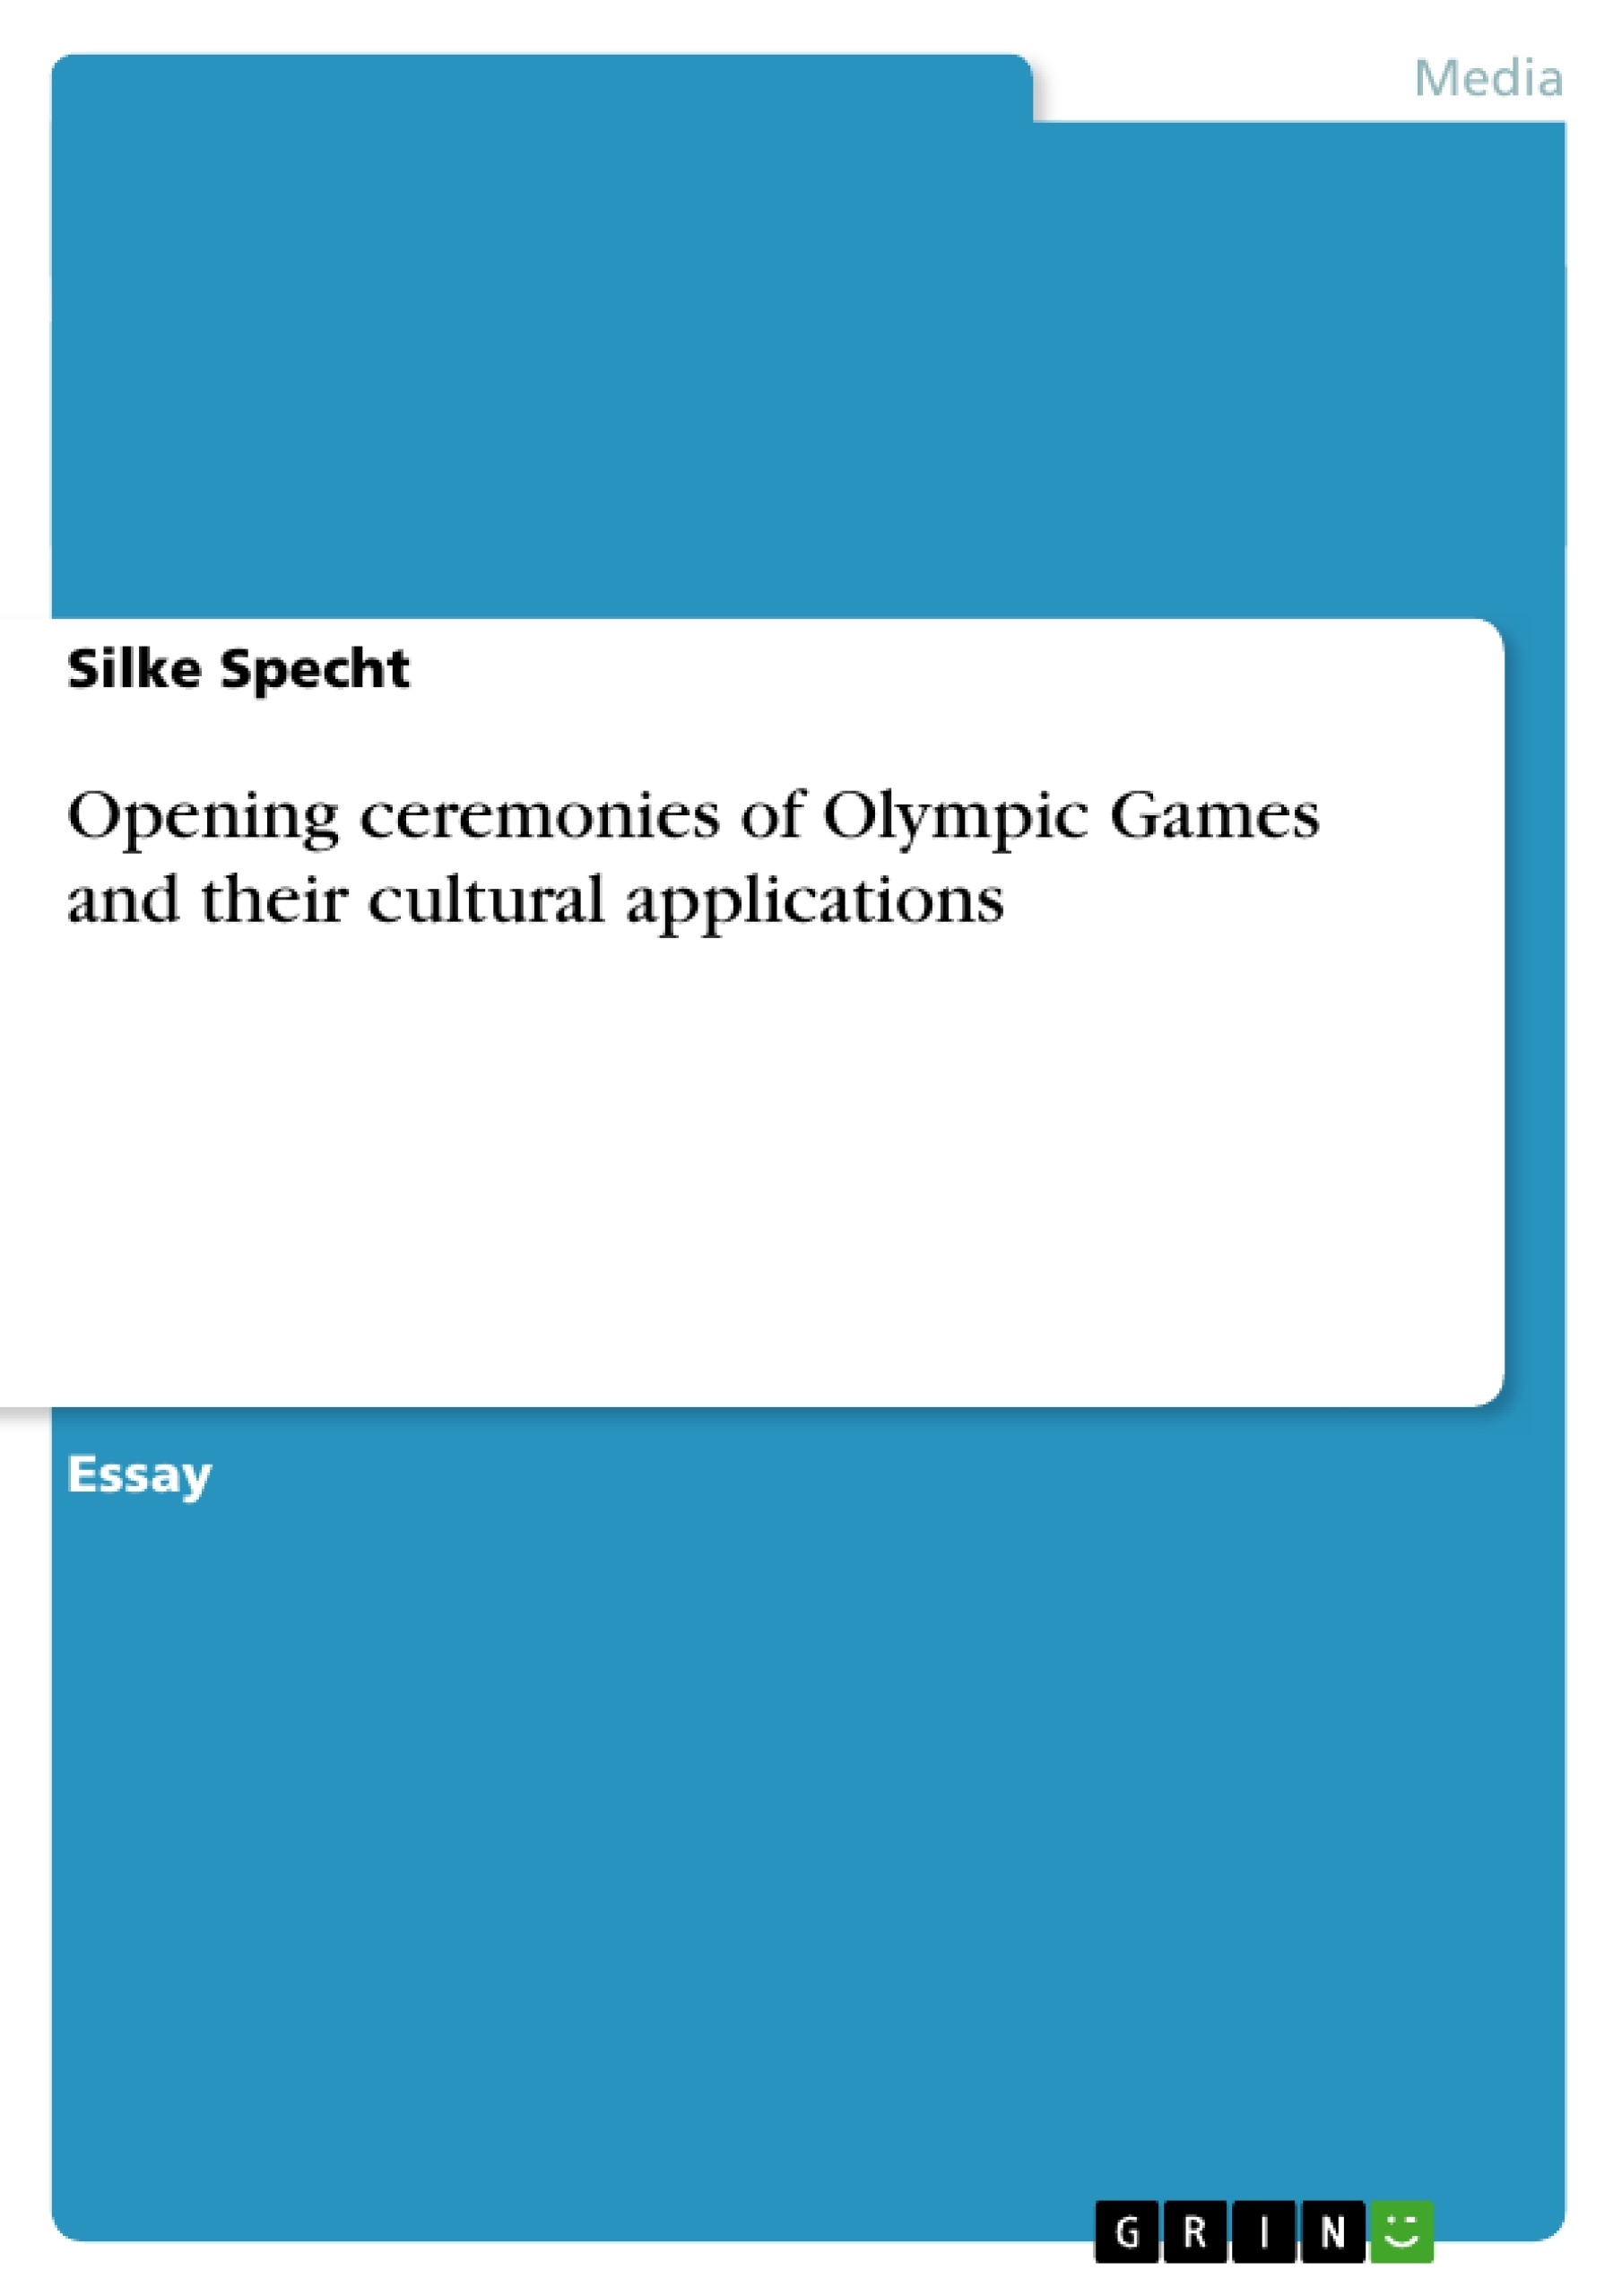 Titre: Opening ceremonies of Olympic Games and their cultural applications